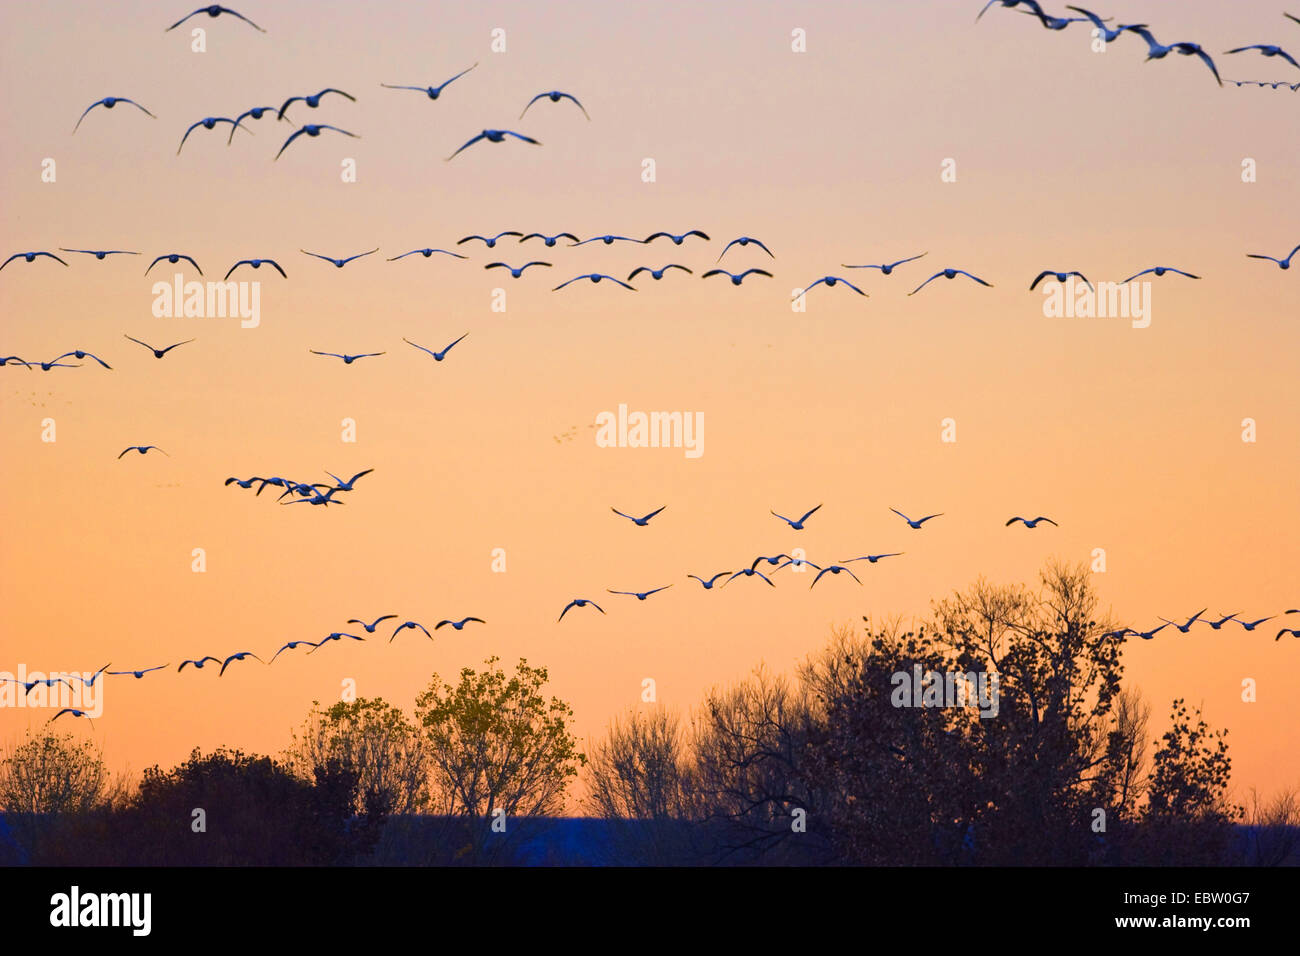 snow goose (Anser caerulescens atlanticus, Chen caerulescens atlanticus), Snow Geese flying to their roosting place, USA, New Mexico, Bosque del Apache Wildlife Refuge Stock Photo